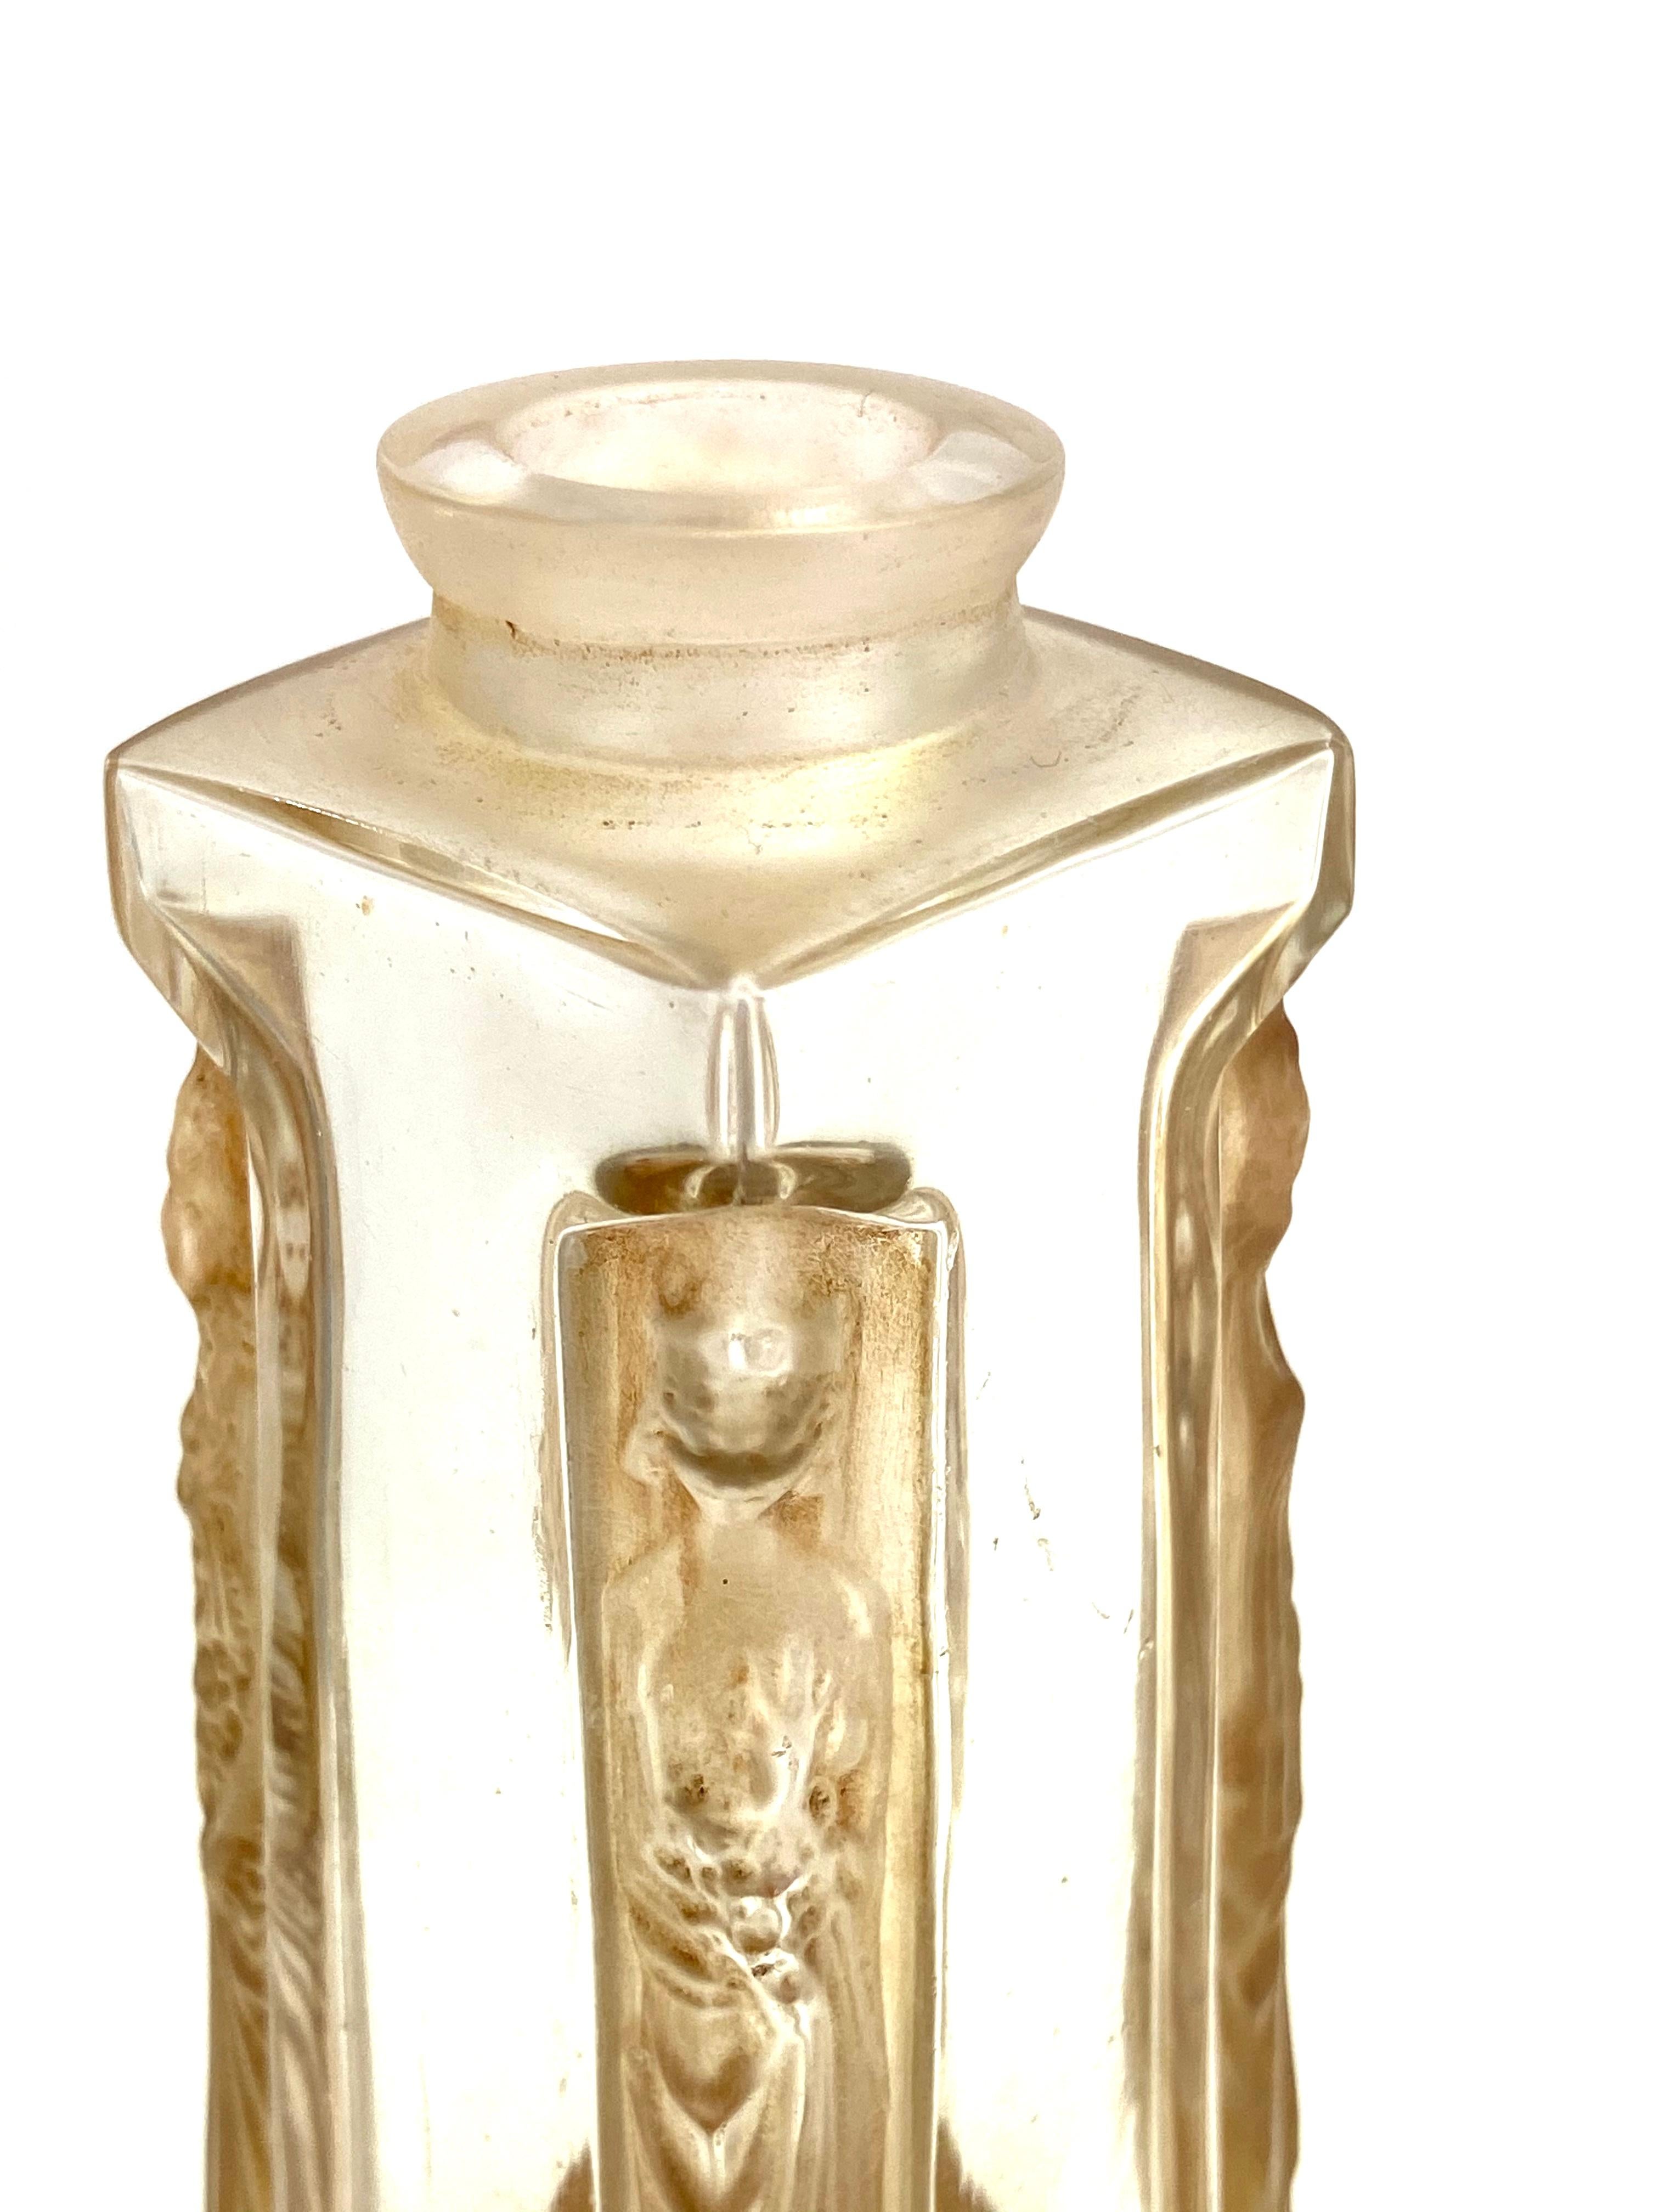 Molded 1914 Rene Lalique Ambre Perfume Bottle D'Orsay Frosted Glass Sepia Patina